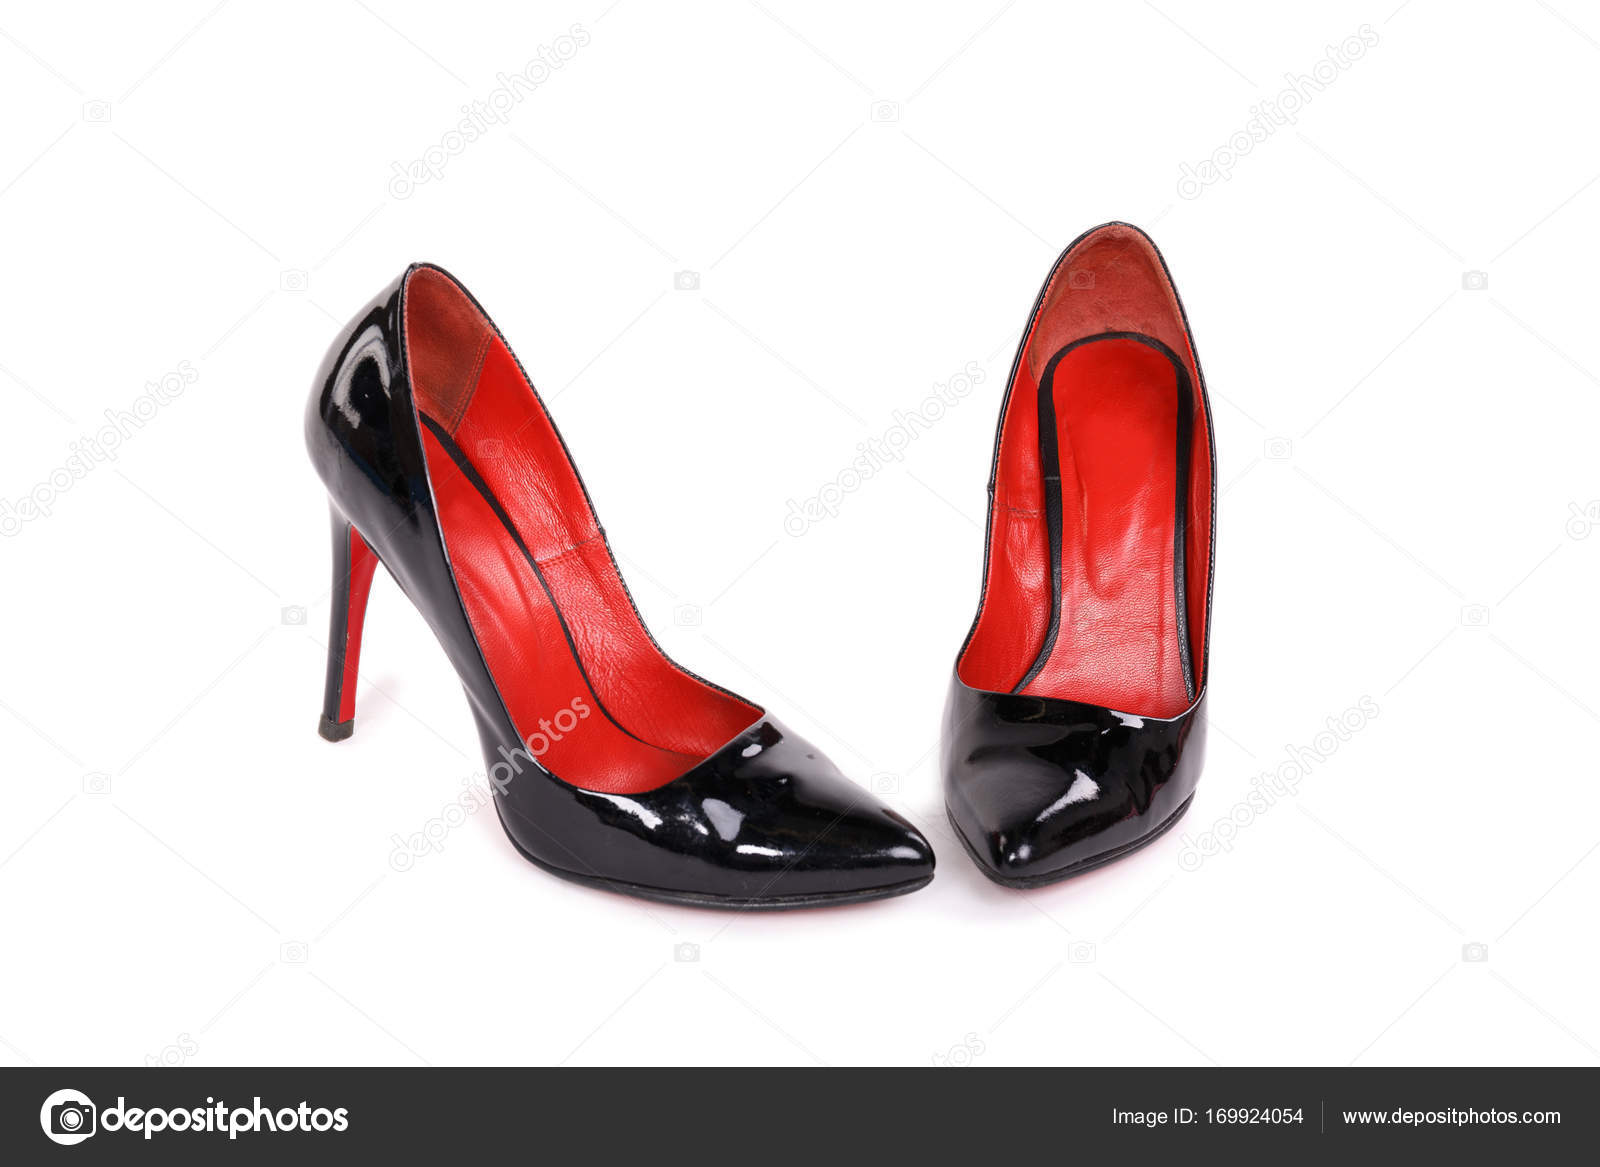 Fashionable shoes. Black and red shoes on a white background Stock